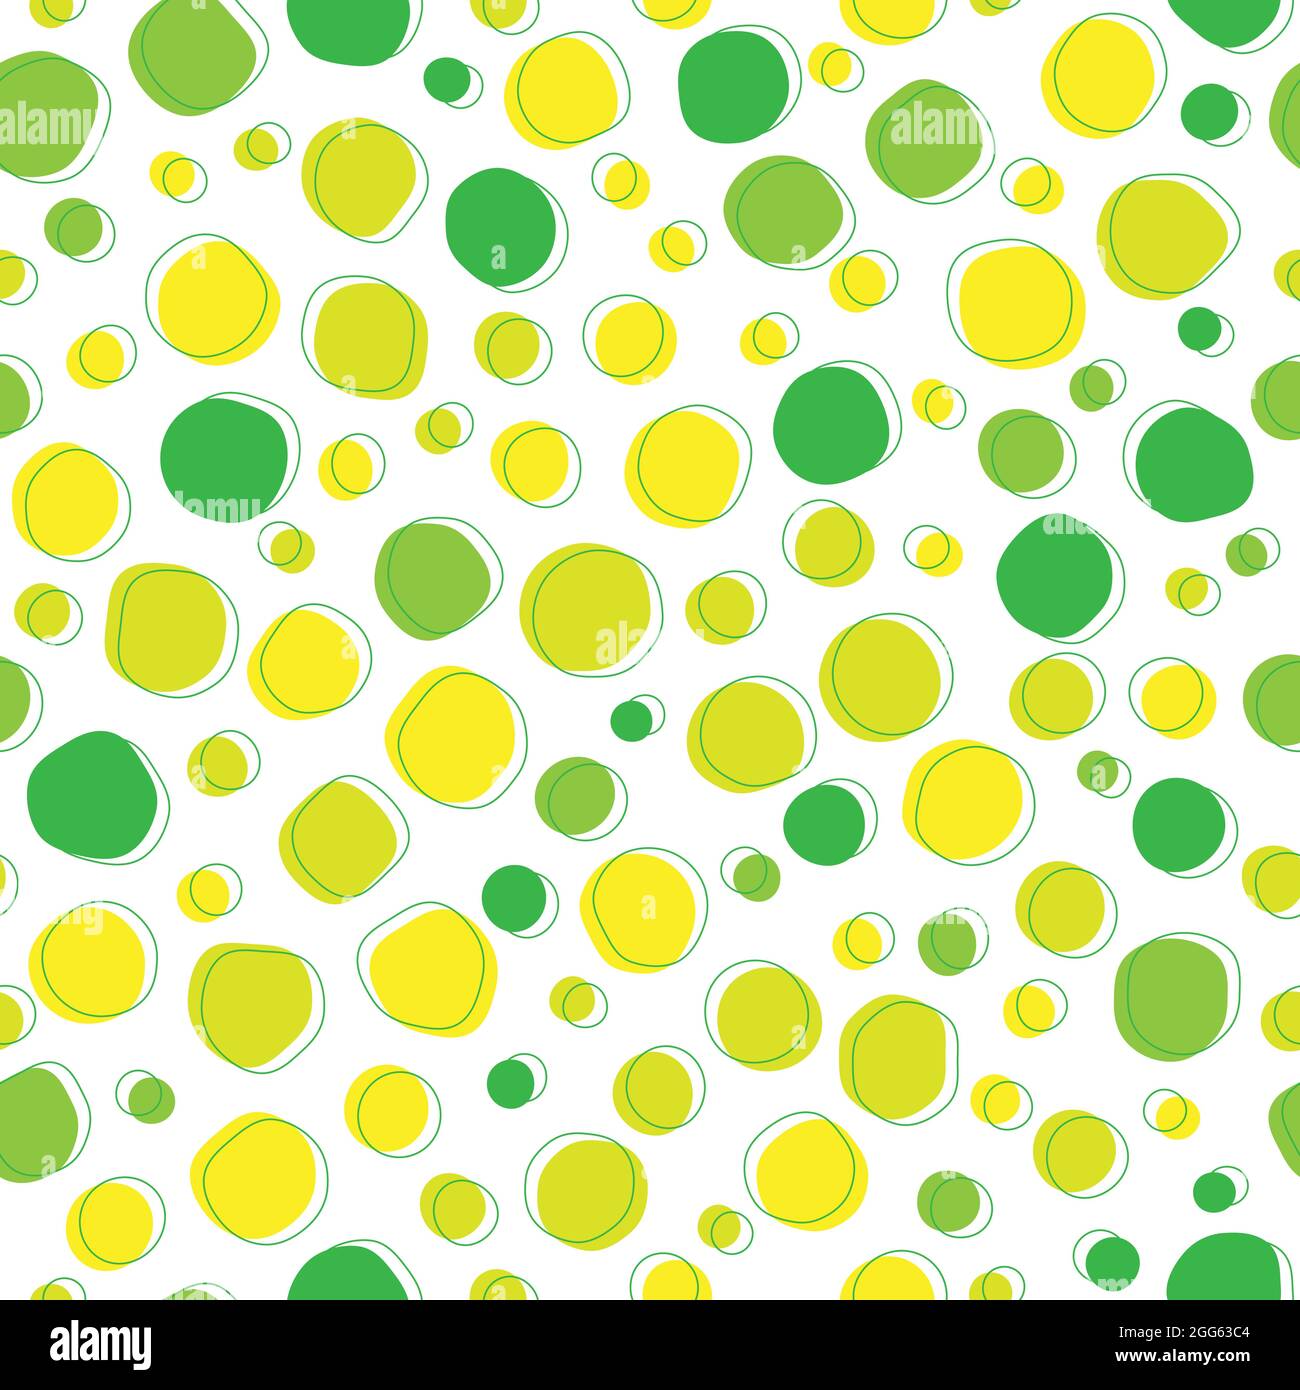 Abstract green dots organic shape seamless pattern background Stock Vector